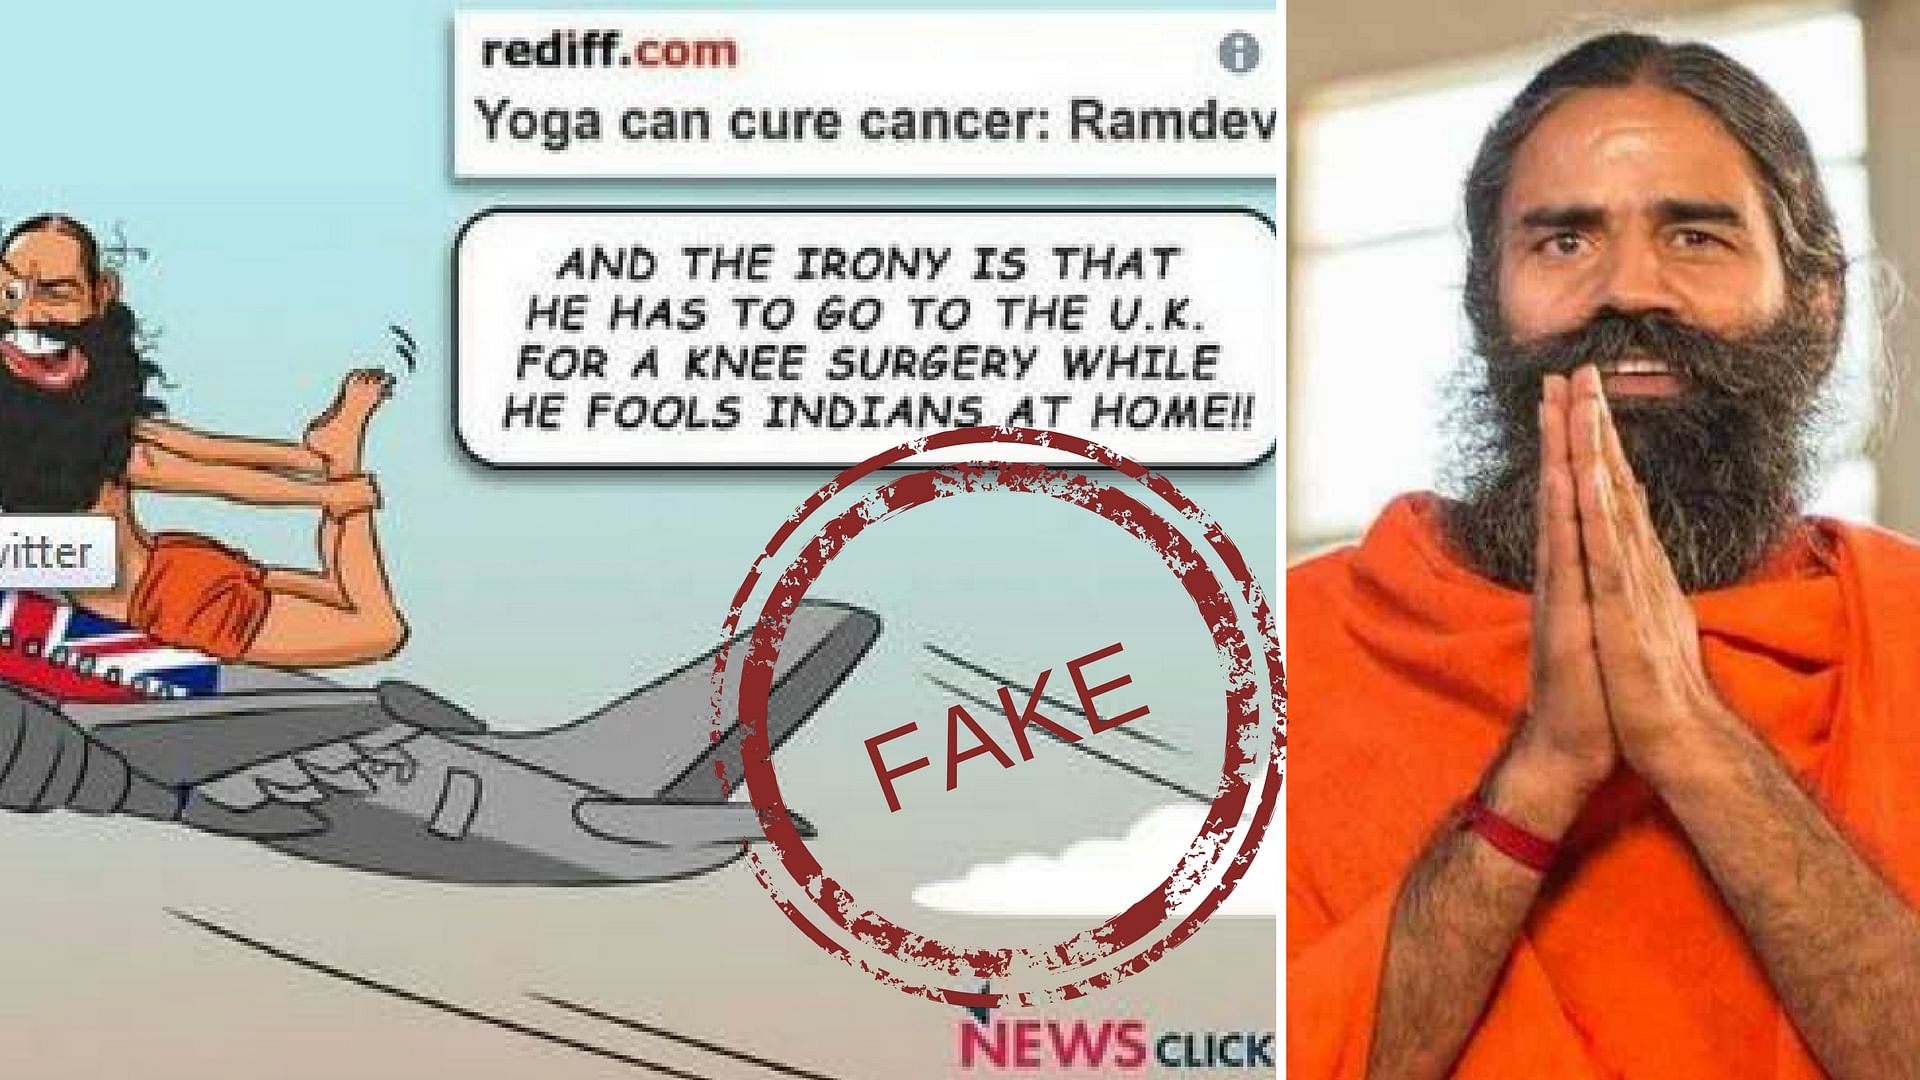 Over the past 24 hours, reports of Yoga guru Baba Ramdev, travelling to London for his knee surgery went viral.